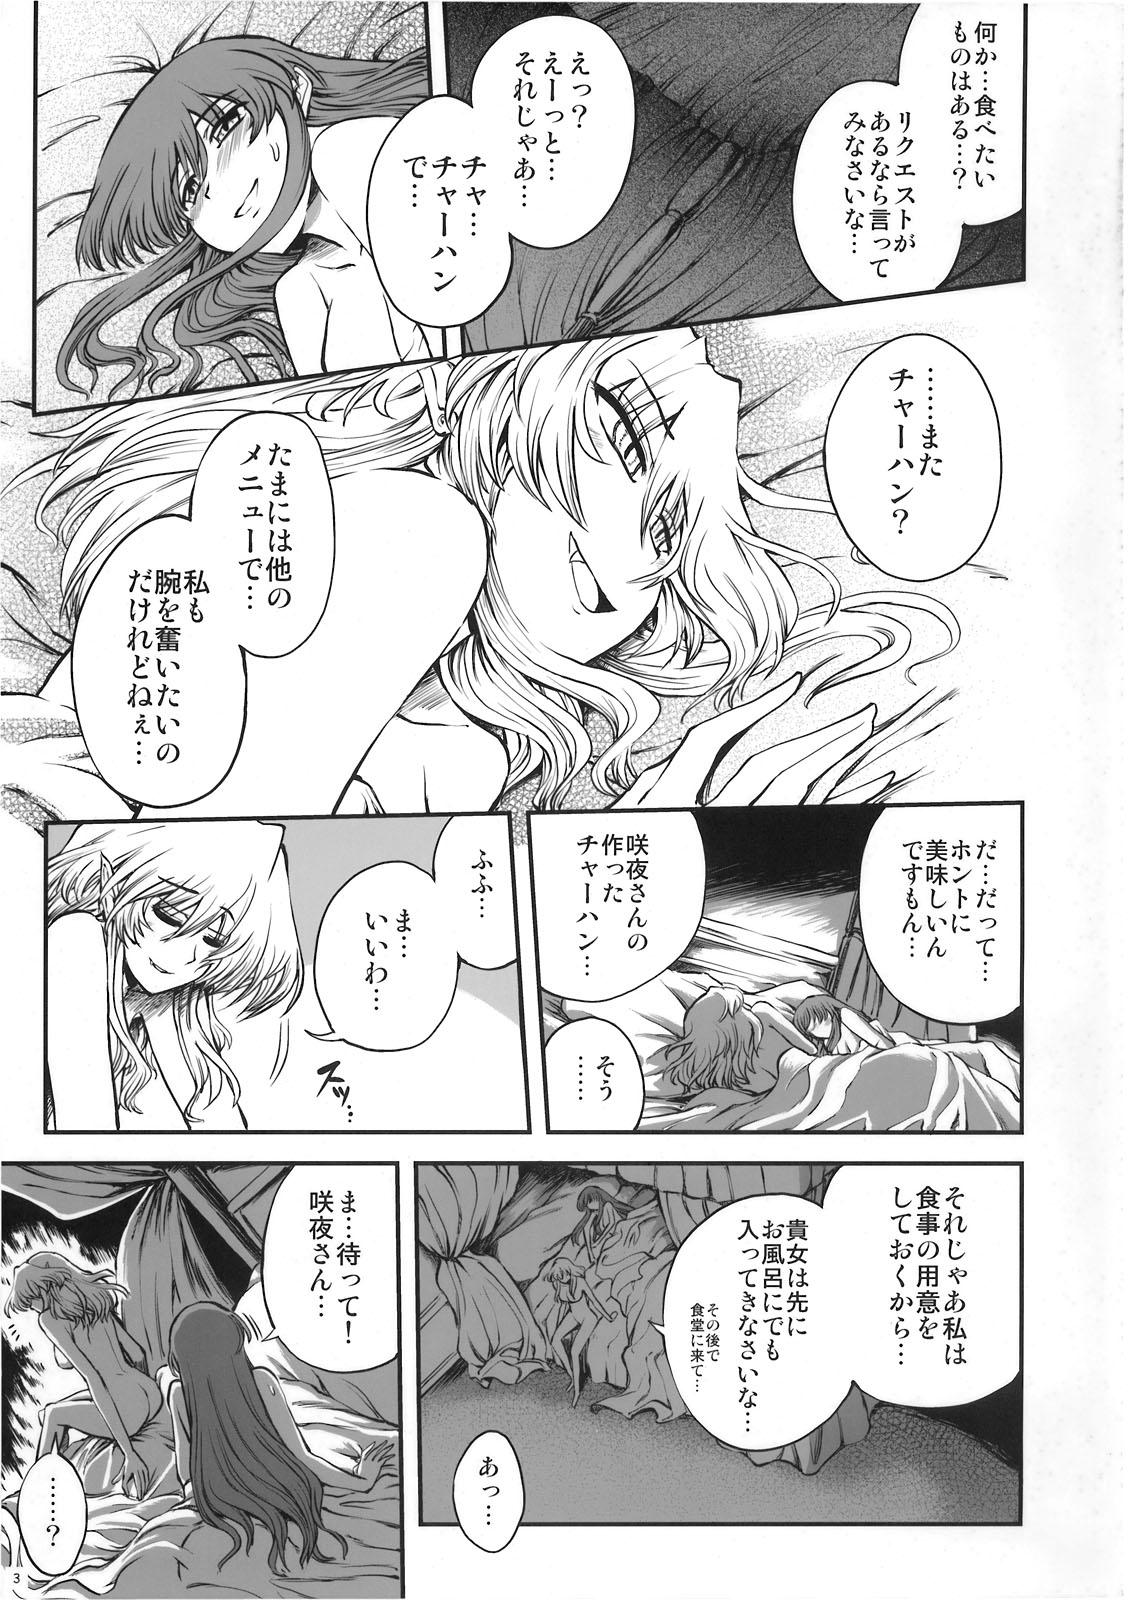 Arrecha Luna Dial Maid to Chi no Unmei dokei Lunatic+alpha - Touhou project Old Man - Page 4